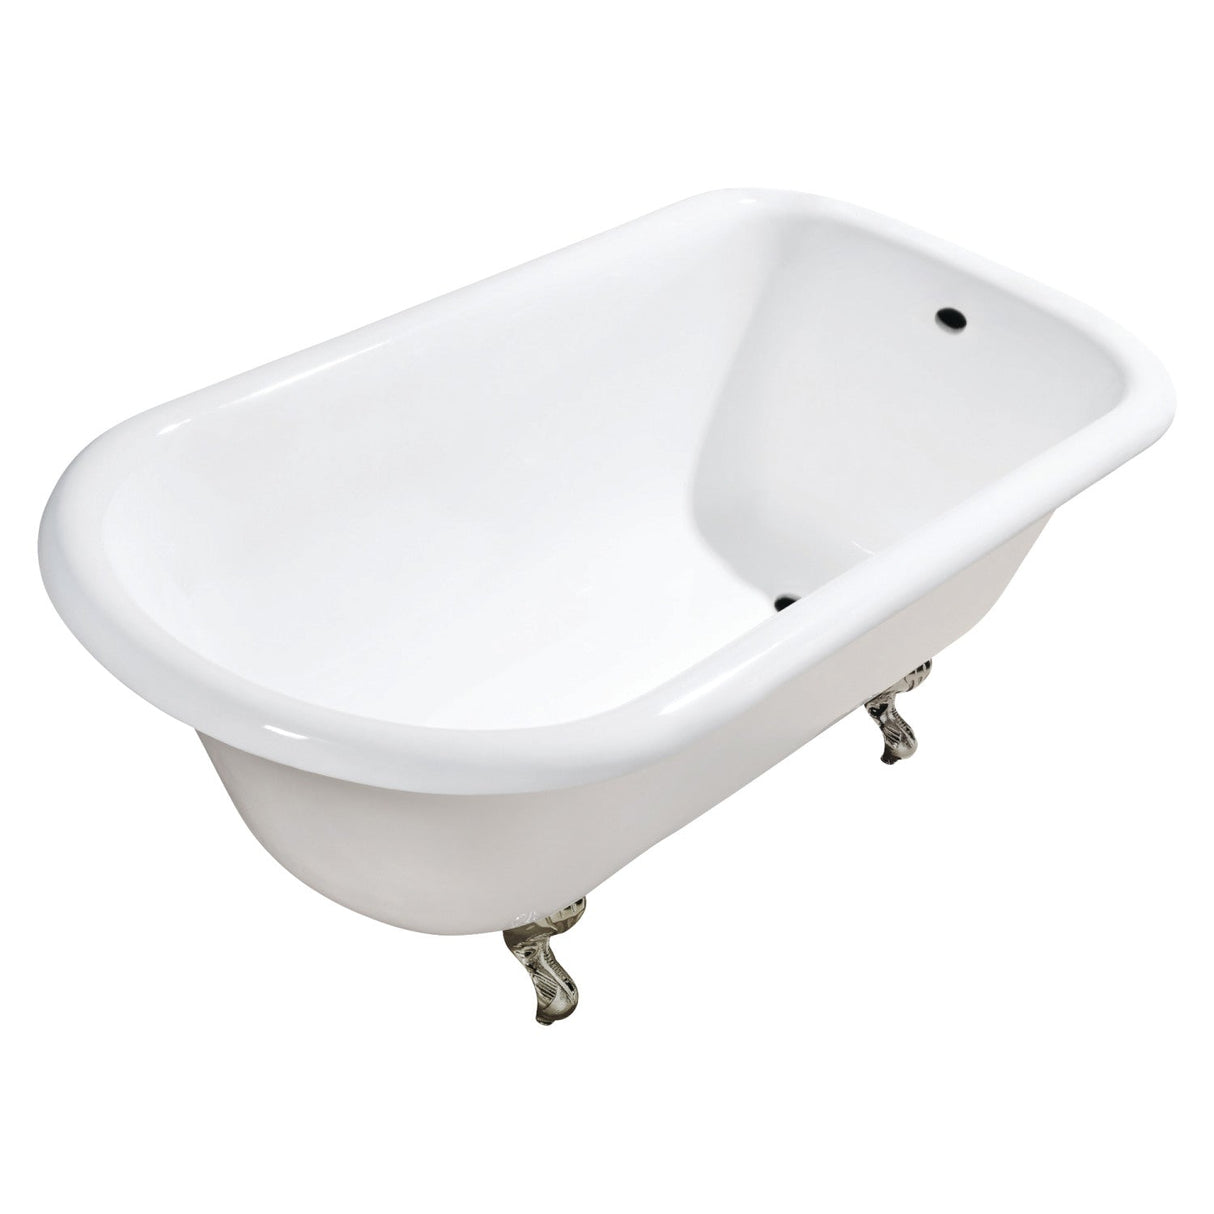 Aqua Eden VCTND543019W8 54-Inch Cast Iron Roll Top Clawfoot Tub (No Faucet Drillings), White/Brushed Nickel